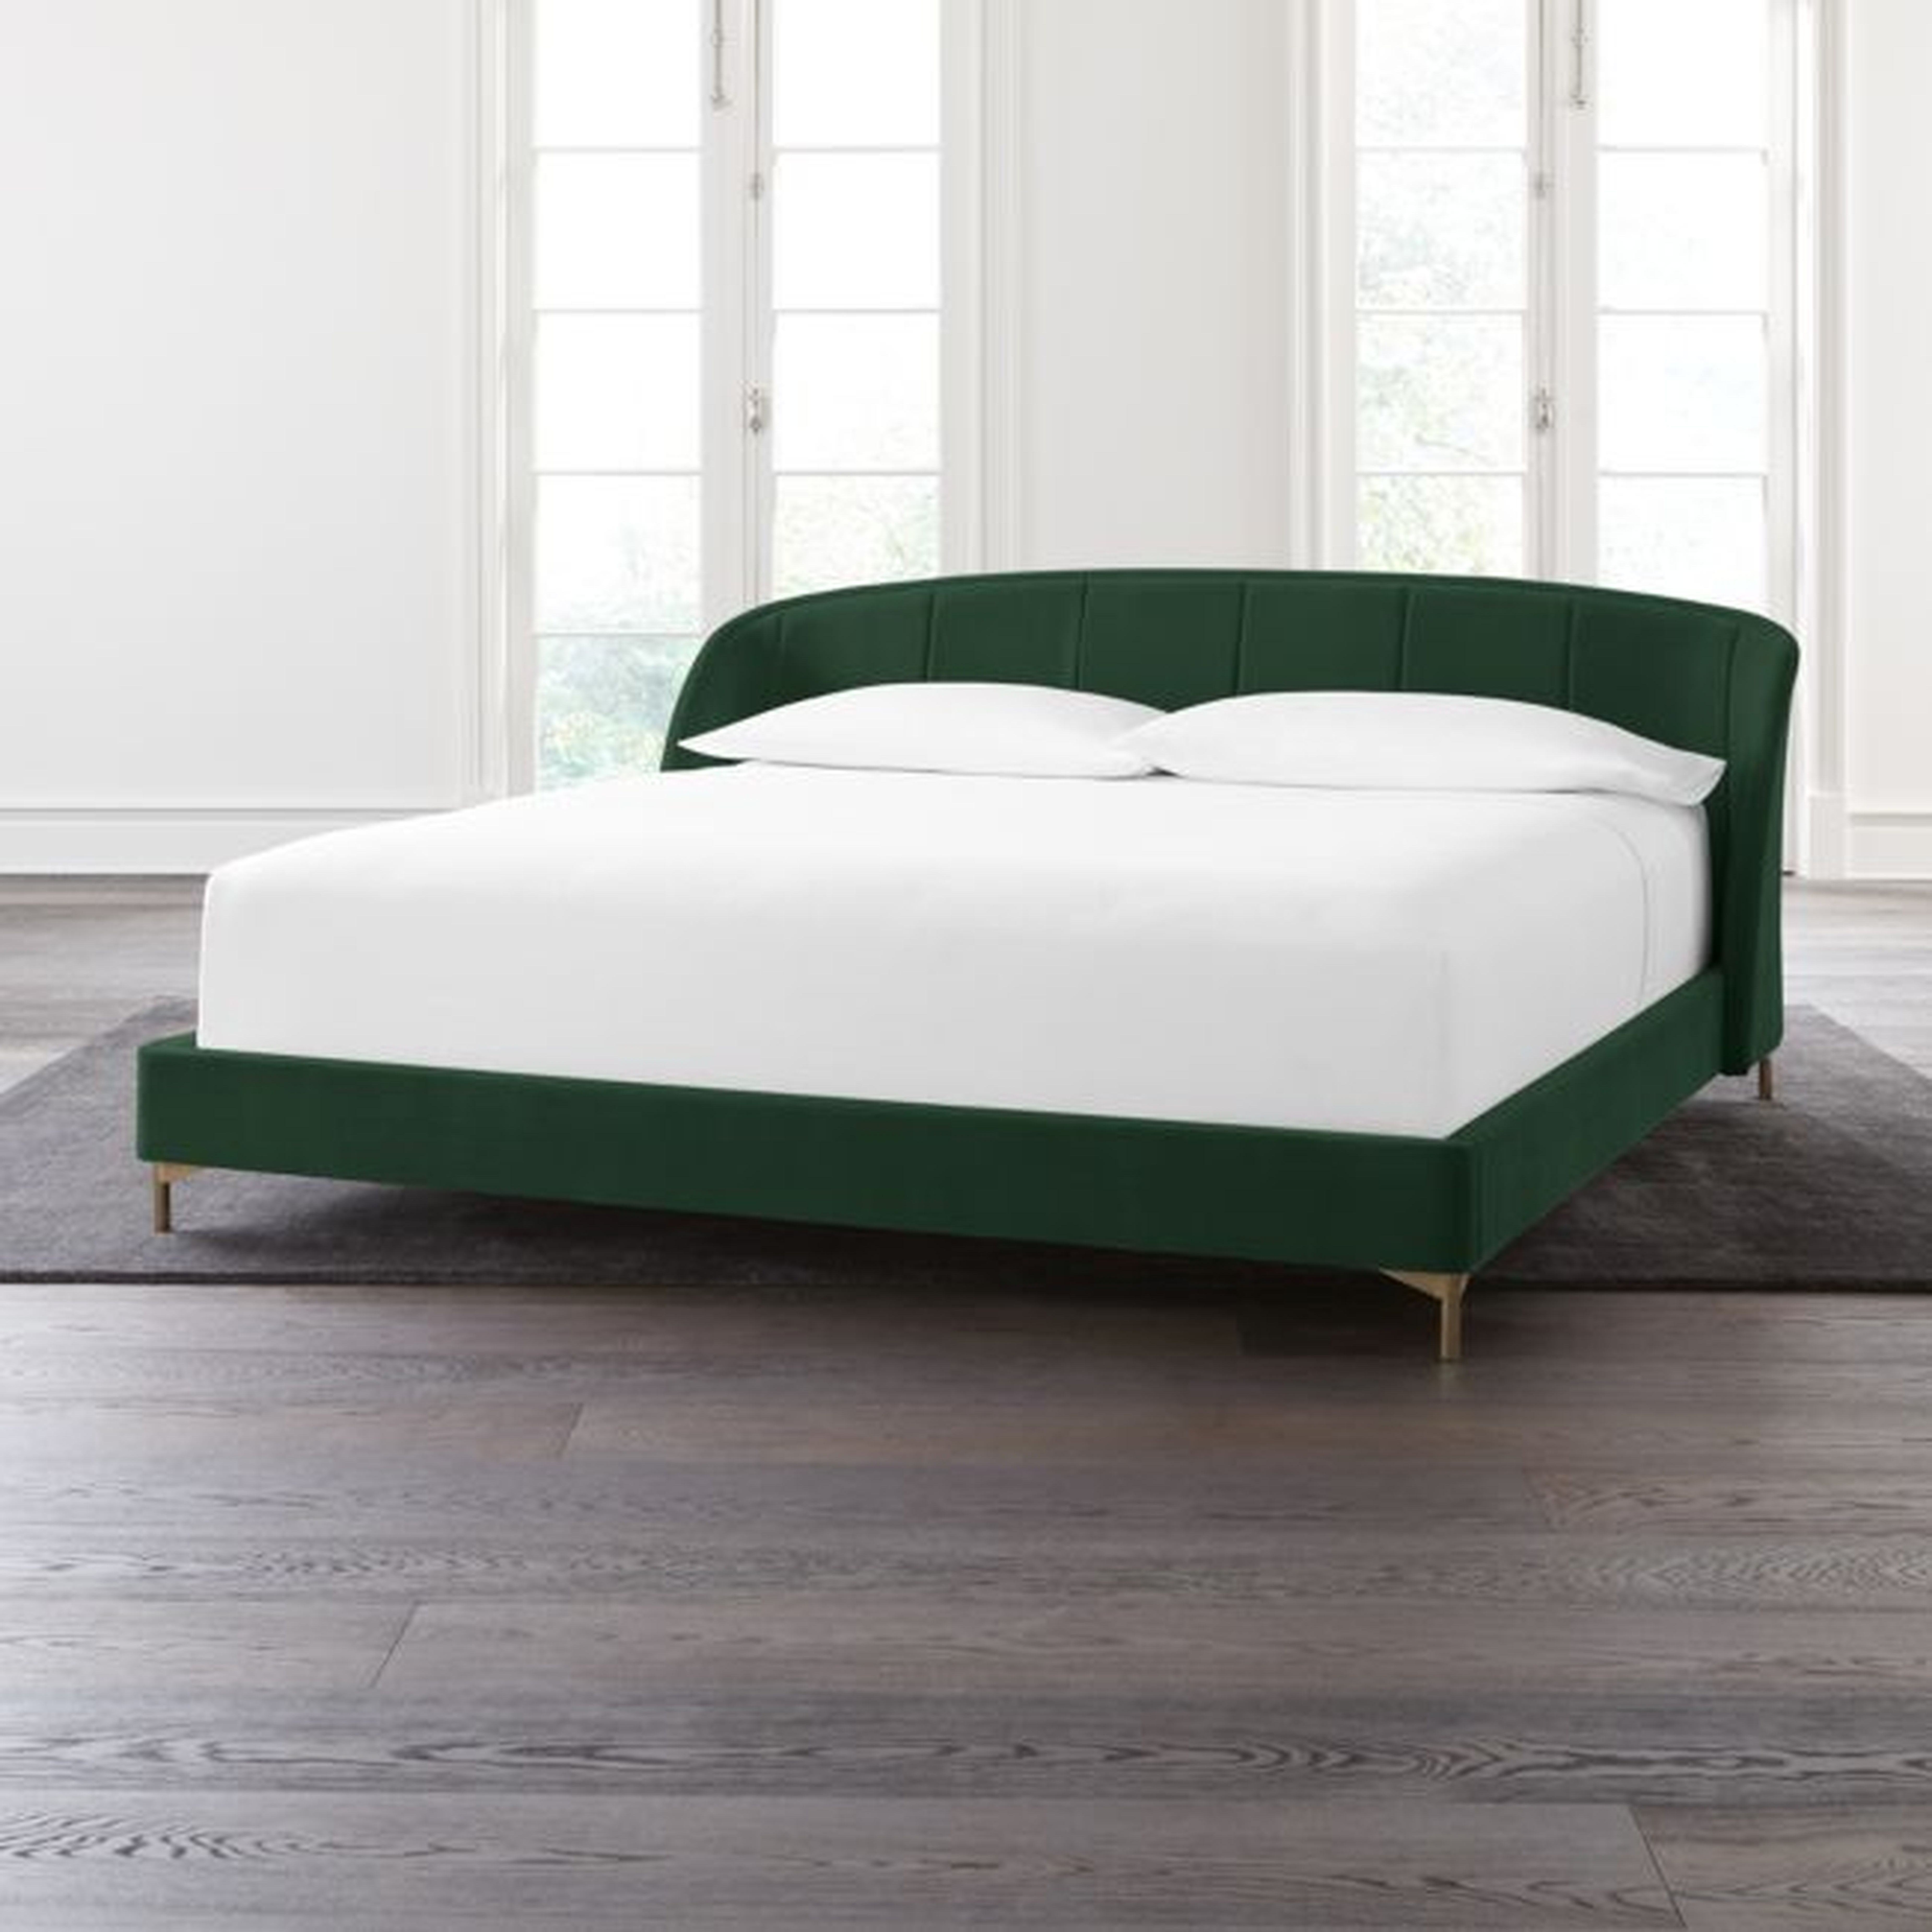 Ava Emerald King Bed - Crate and Barrel